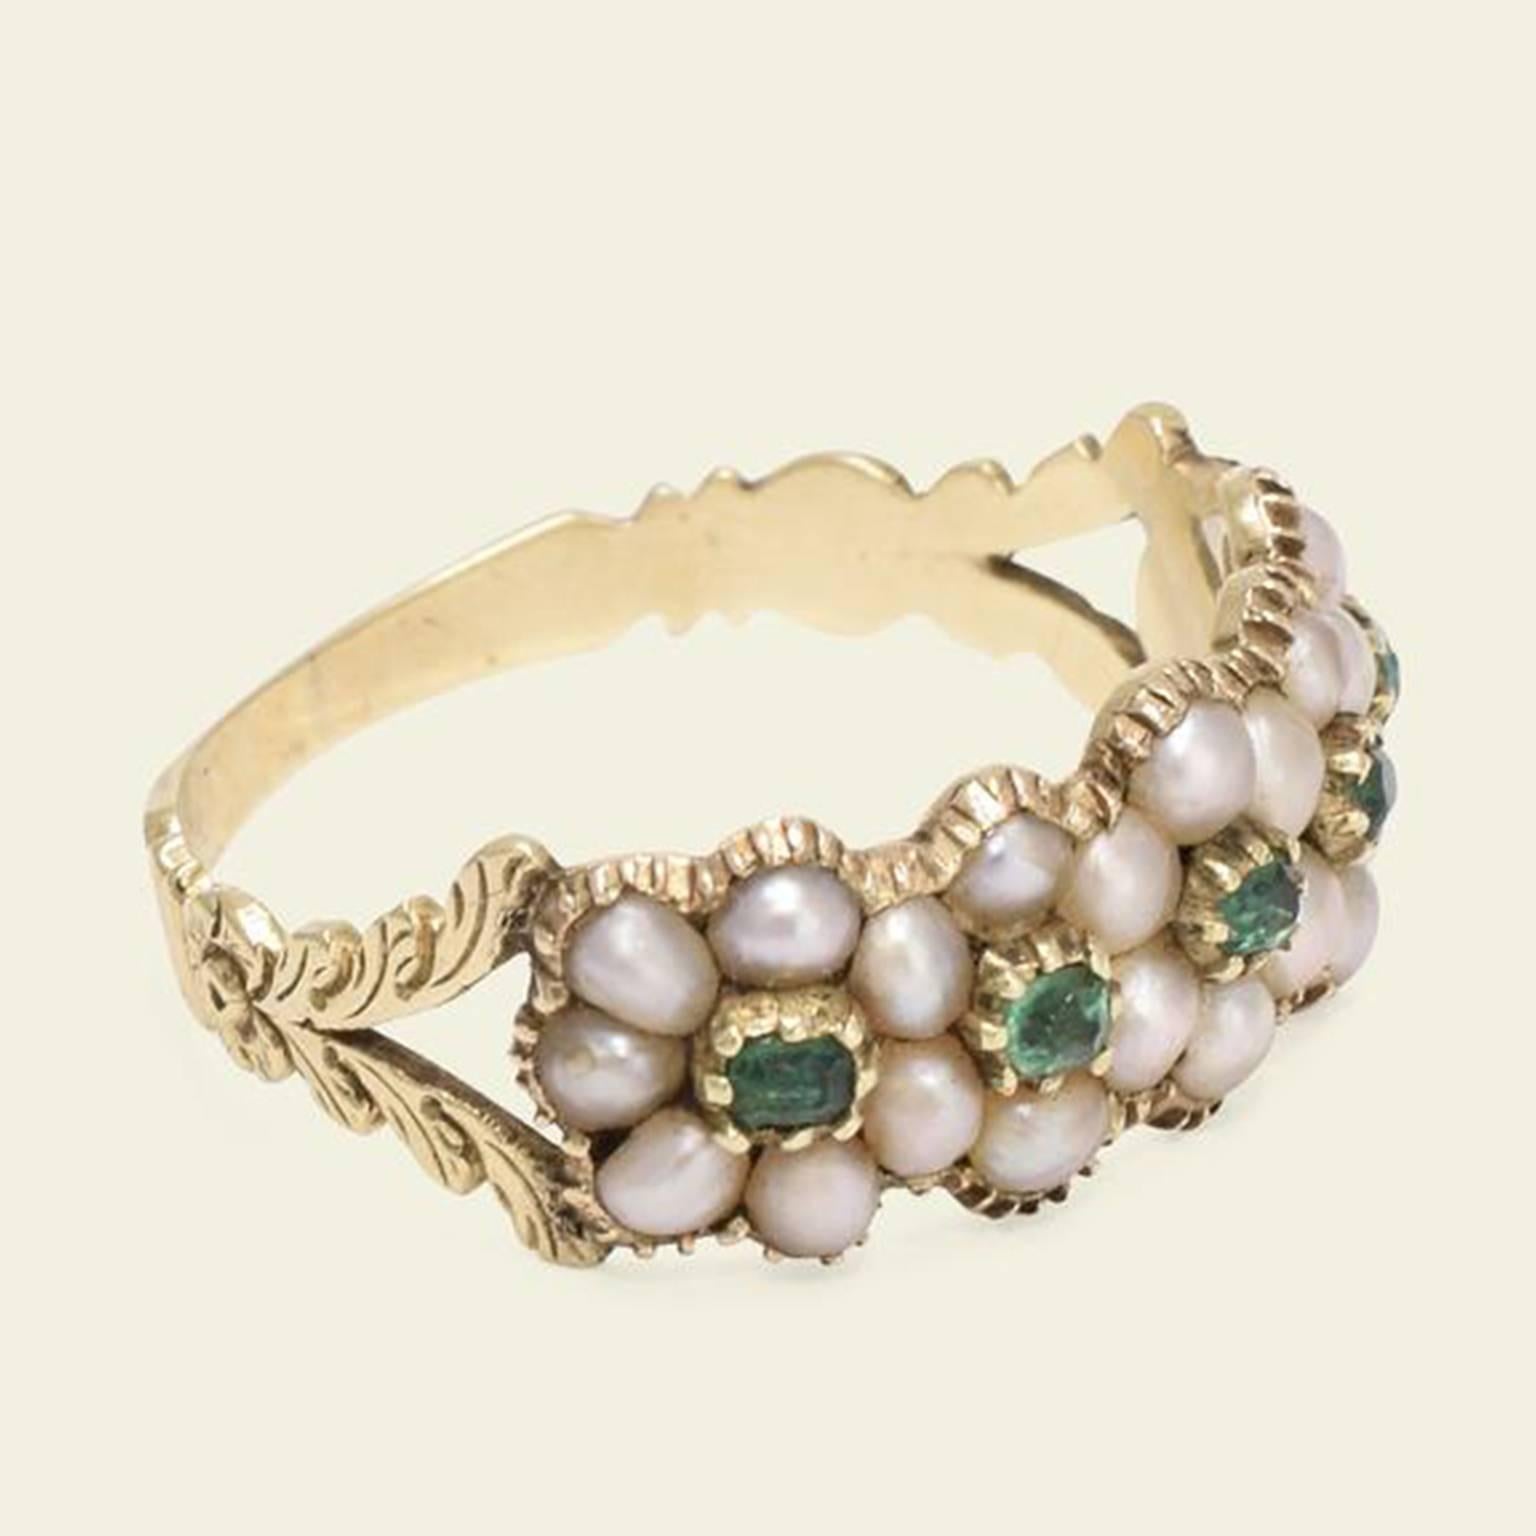 This wonderful early 19th century ring features a quintet of overlapping daisy clusters composed of seed pearls and emeralds. The stones sit withing classic Georgian crimped settings with a closed back. The ring features split shoulders adorned in